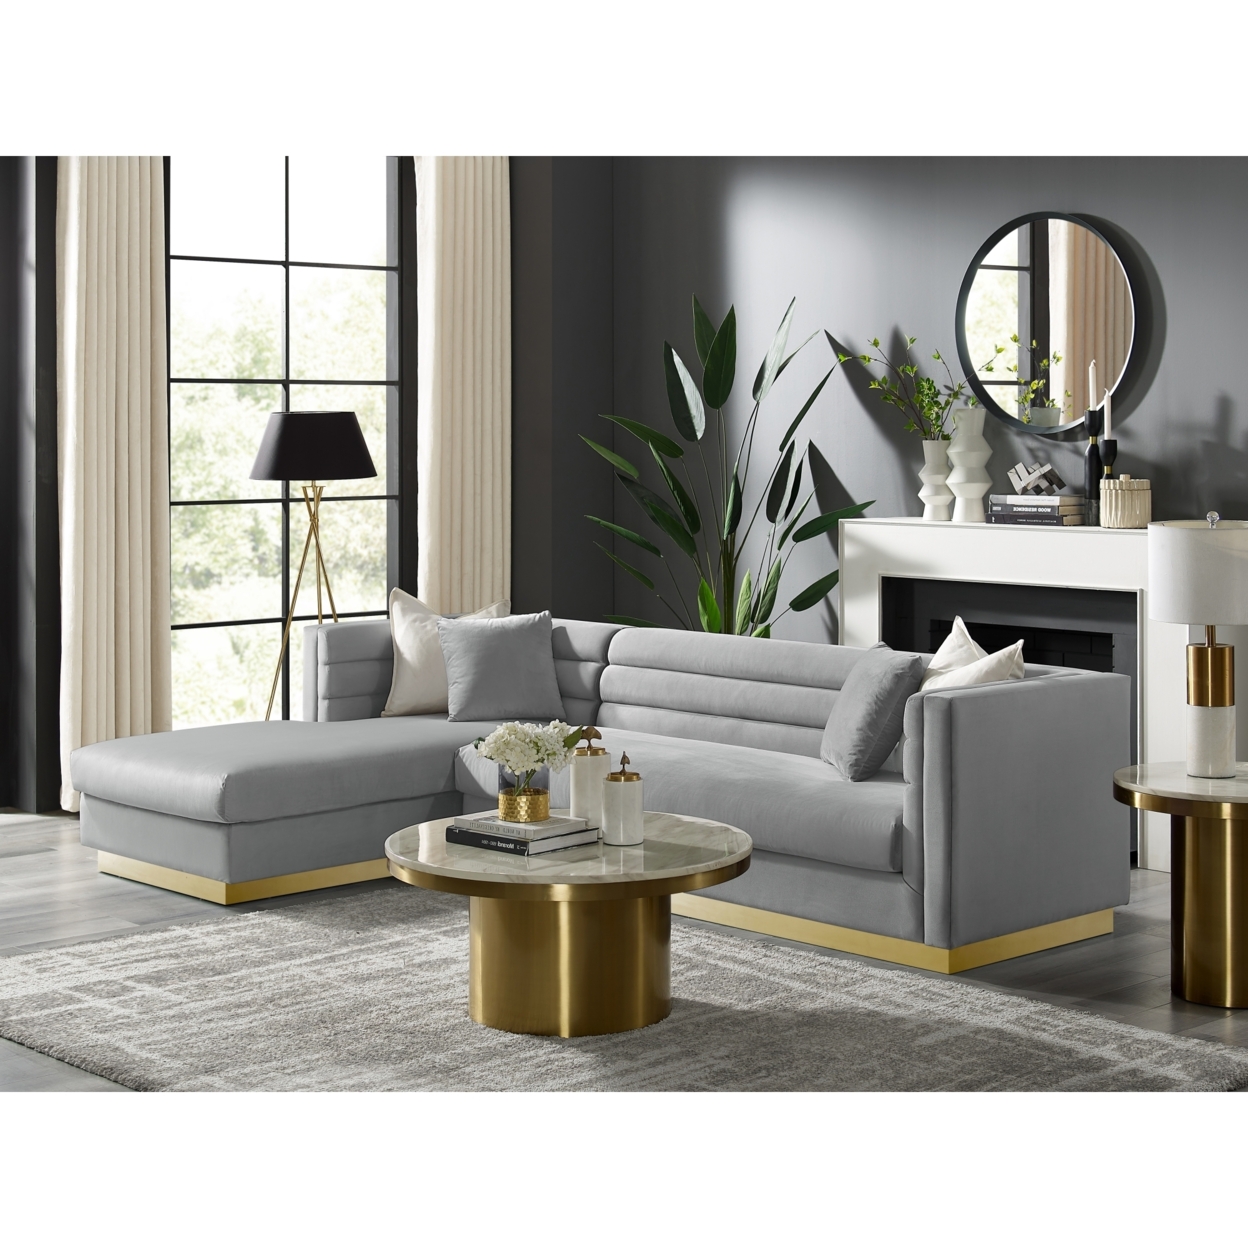 Aja Sofa-Upholstered-Sectional-Metal Base, Square Arms-Horizontal Channel Tufting - grey